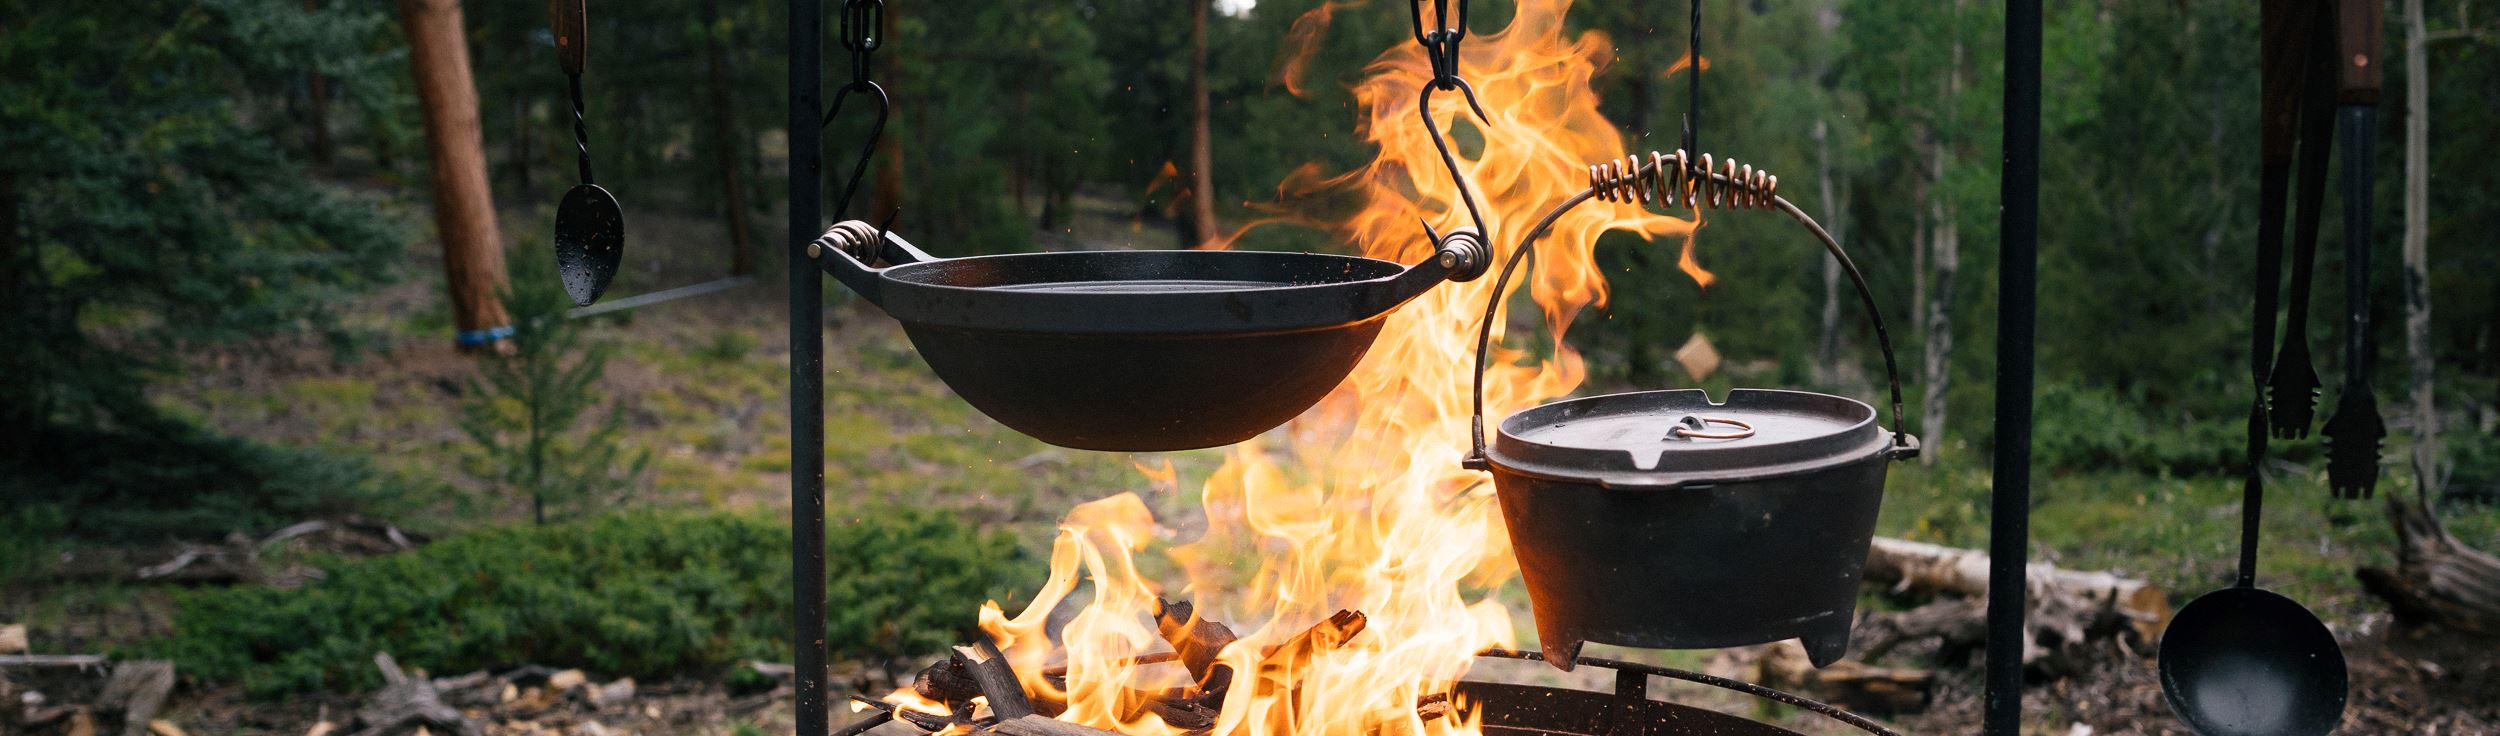 5 Chefs on What to Cook Over an Open Fire